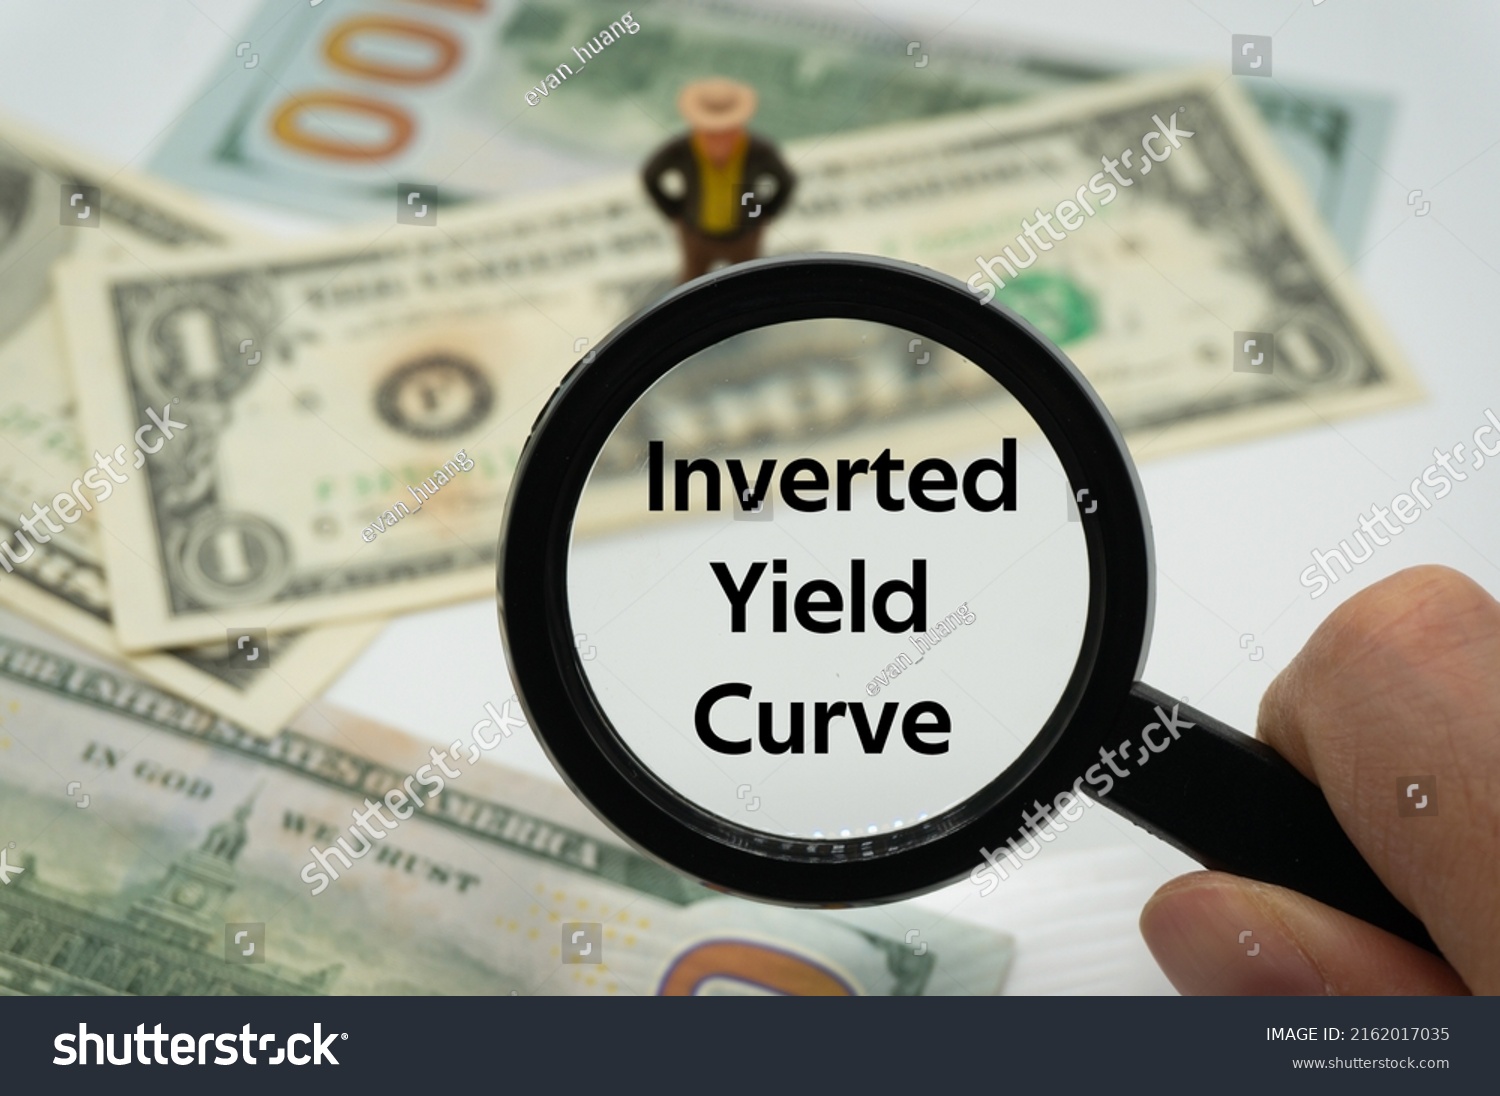 Inverted Yield Curve.Magnifying glass showing the words.Background of banknotes and coins.basic concepts of finance.Business theme.Financial terms. #2162017035